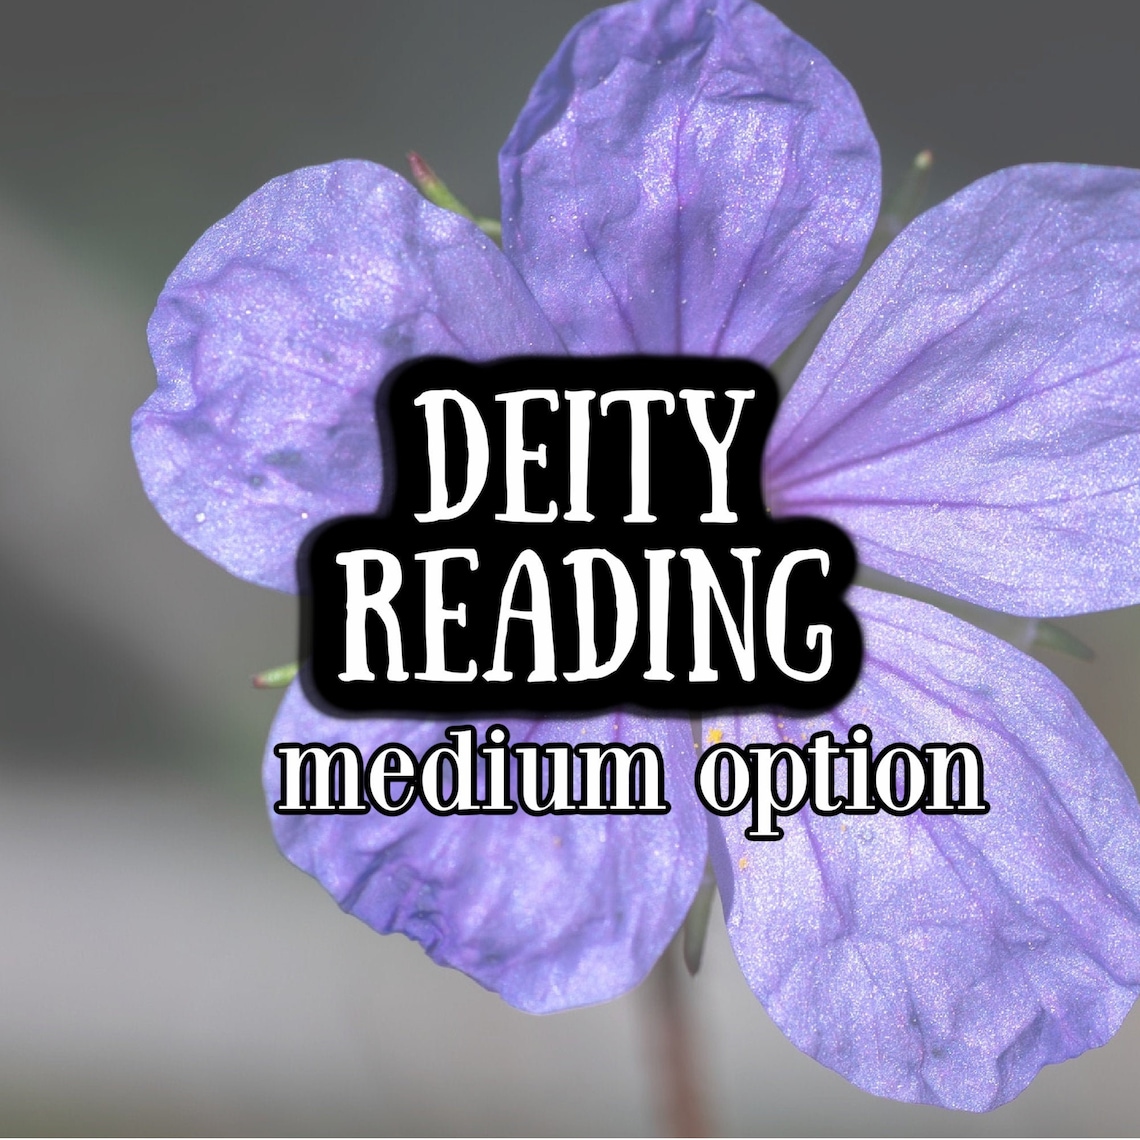 DEITY READING Who's Here and What Should You Know | Etsy